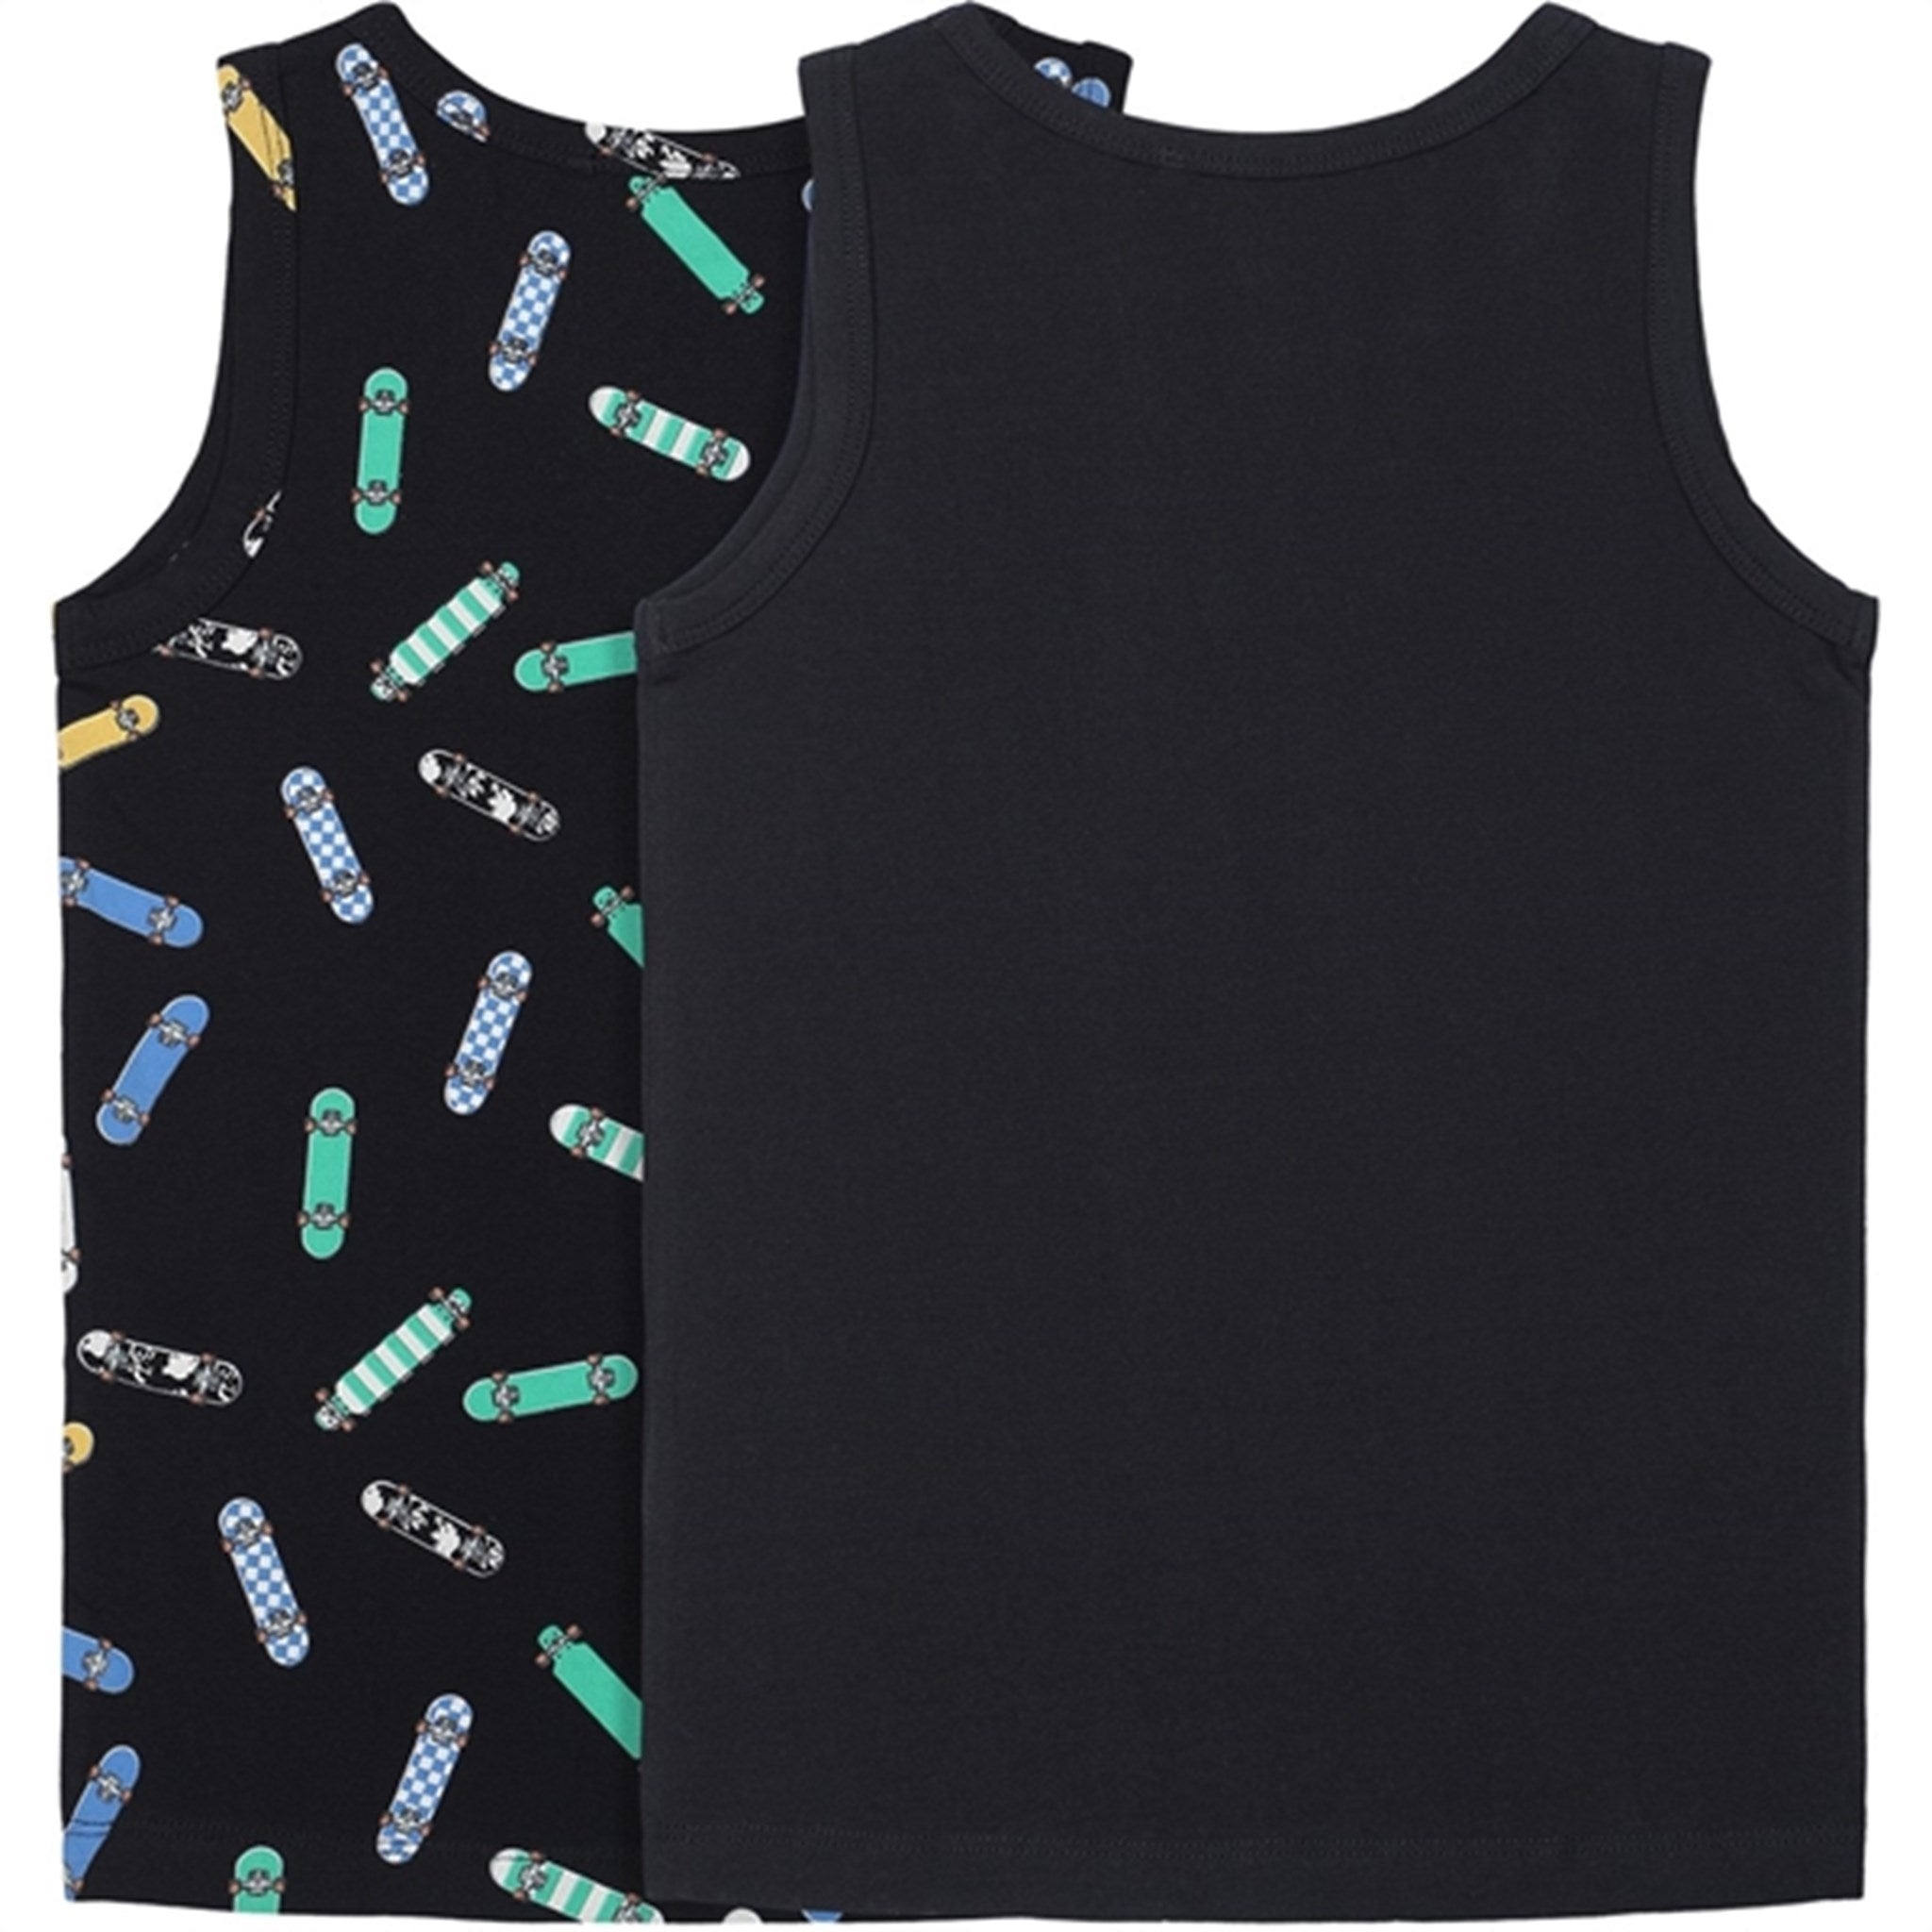 The New Black Beauty Tank Top 2-Pack 2